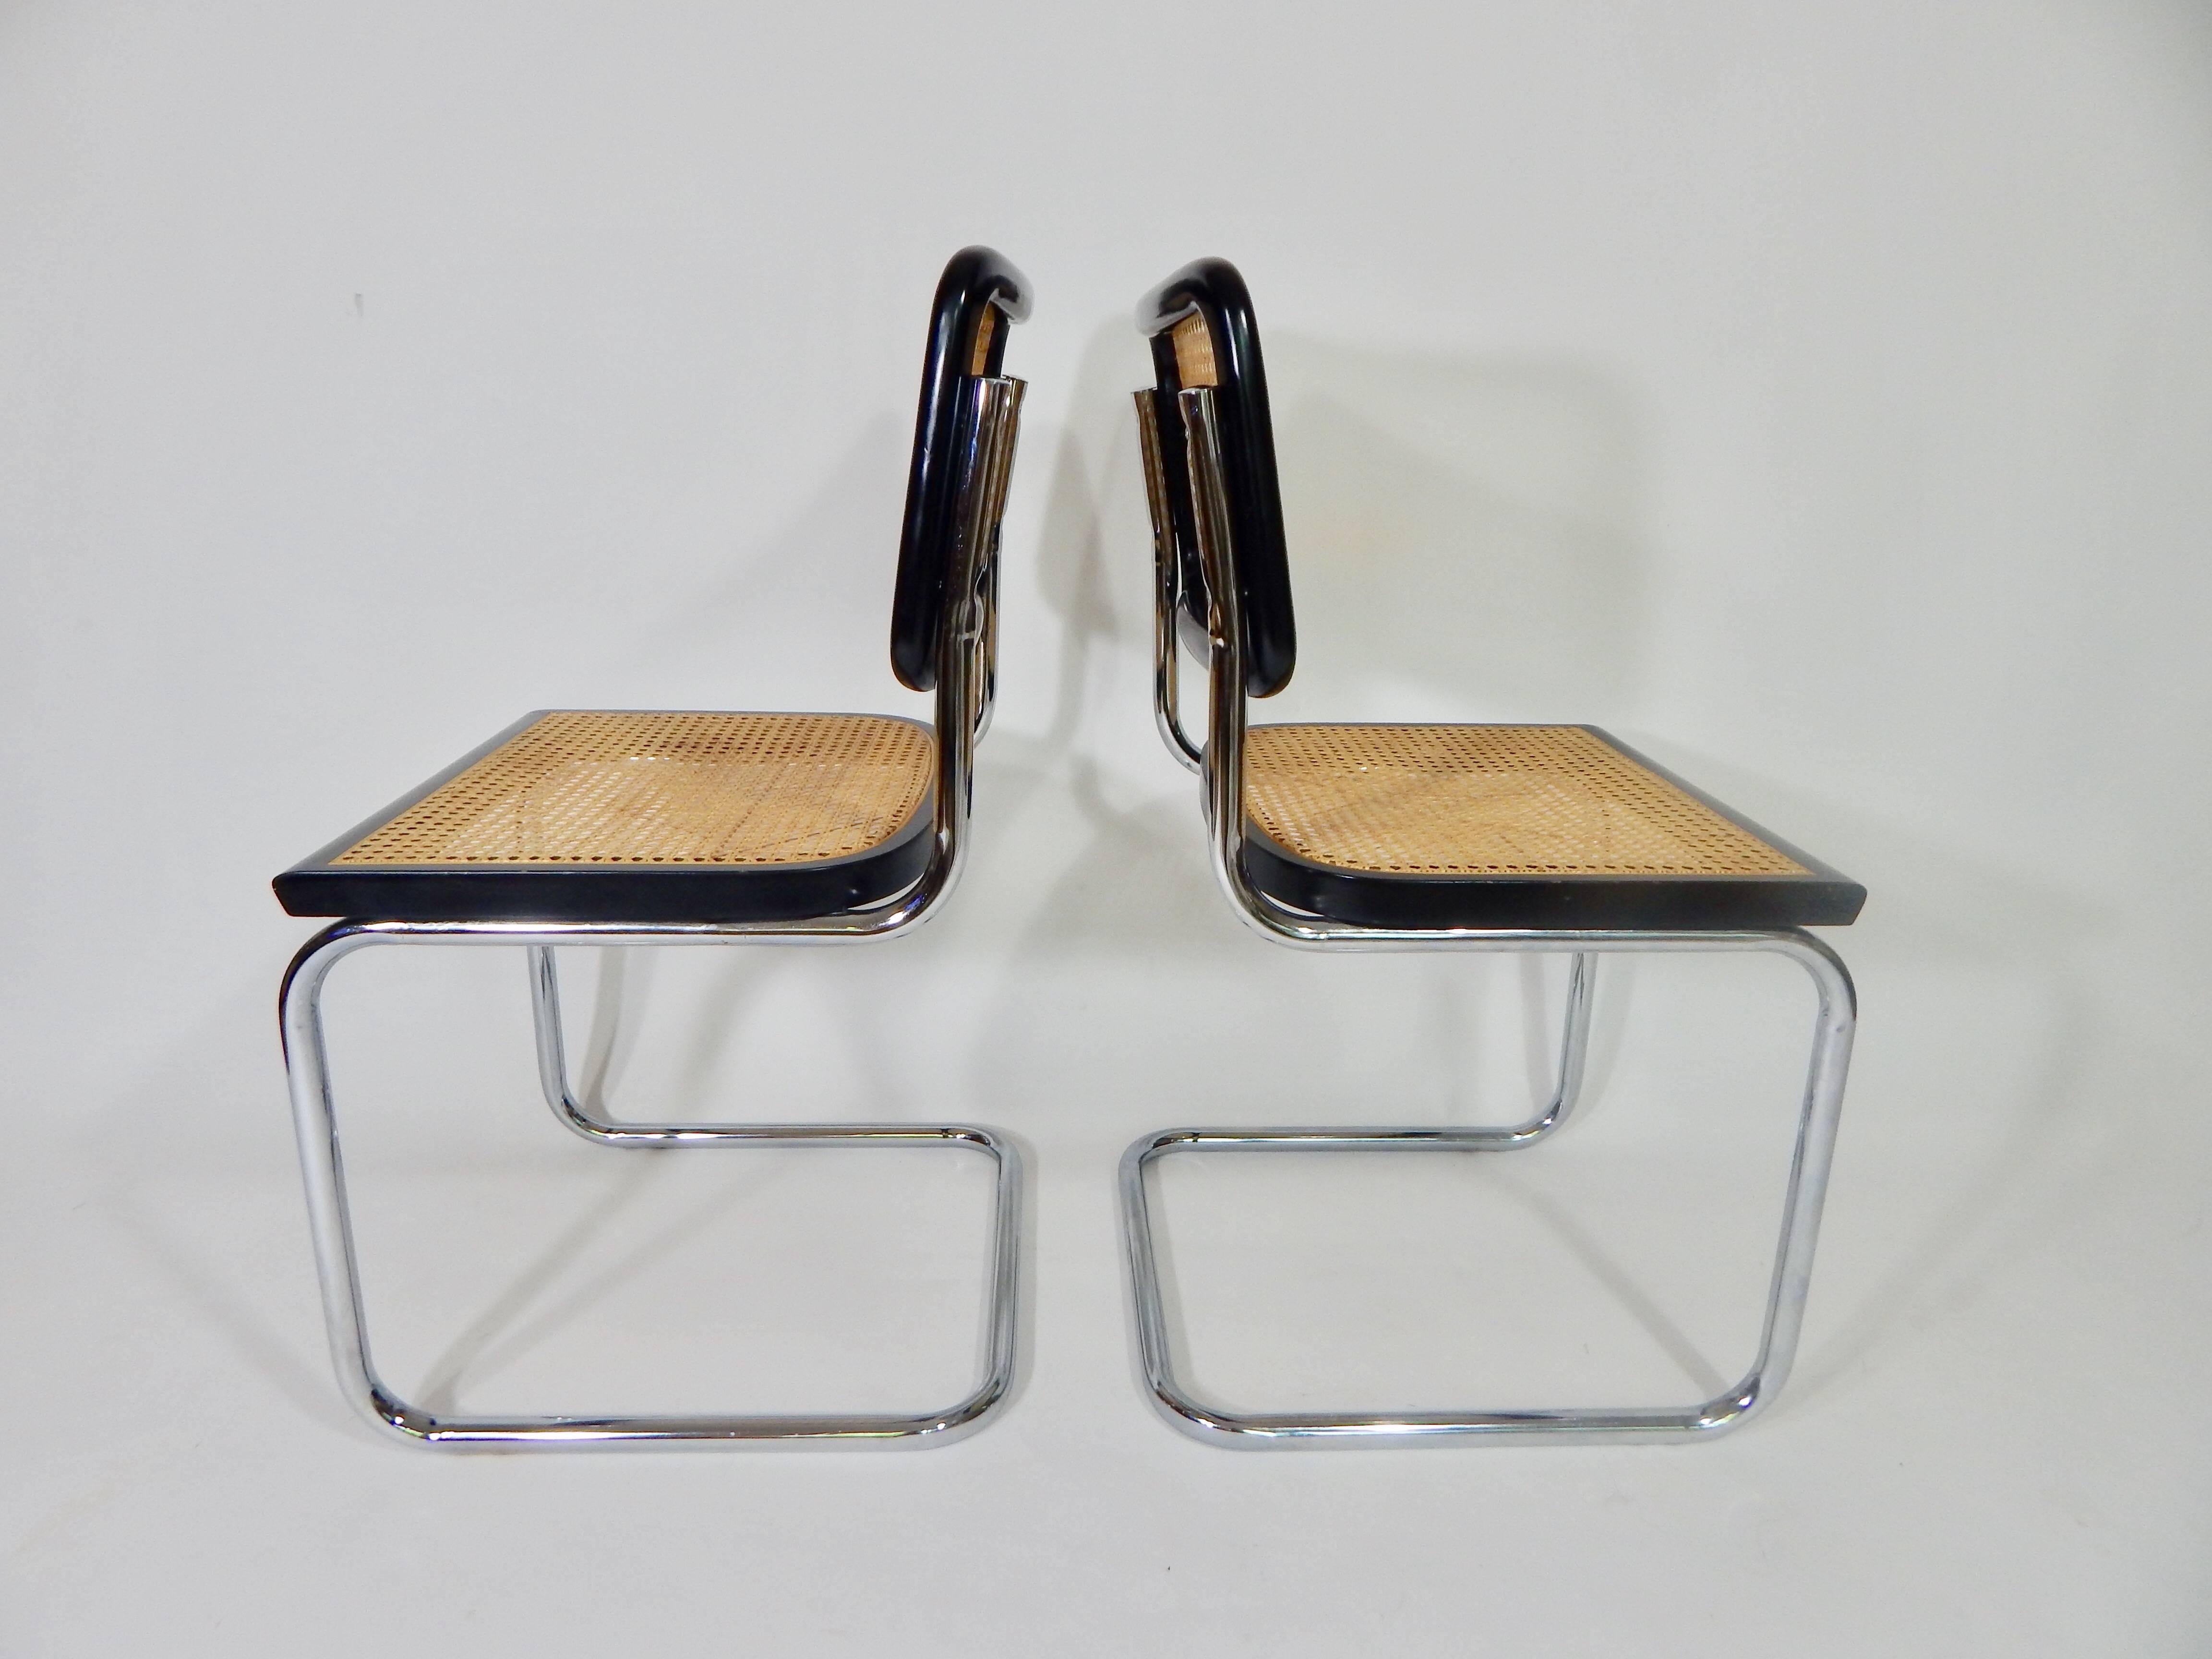 Pair of Mid-Century Marcel Breuer Cane Cesca chairs.
Chairs still retain Made in Italy marking.